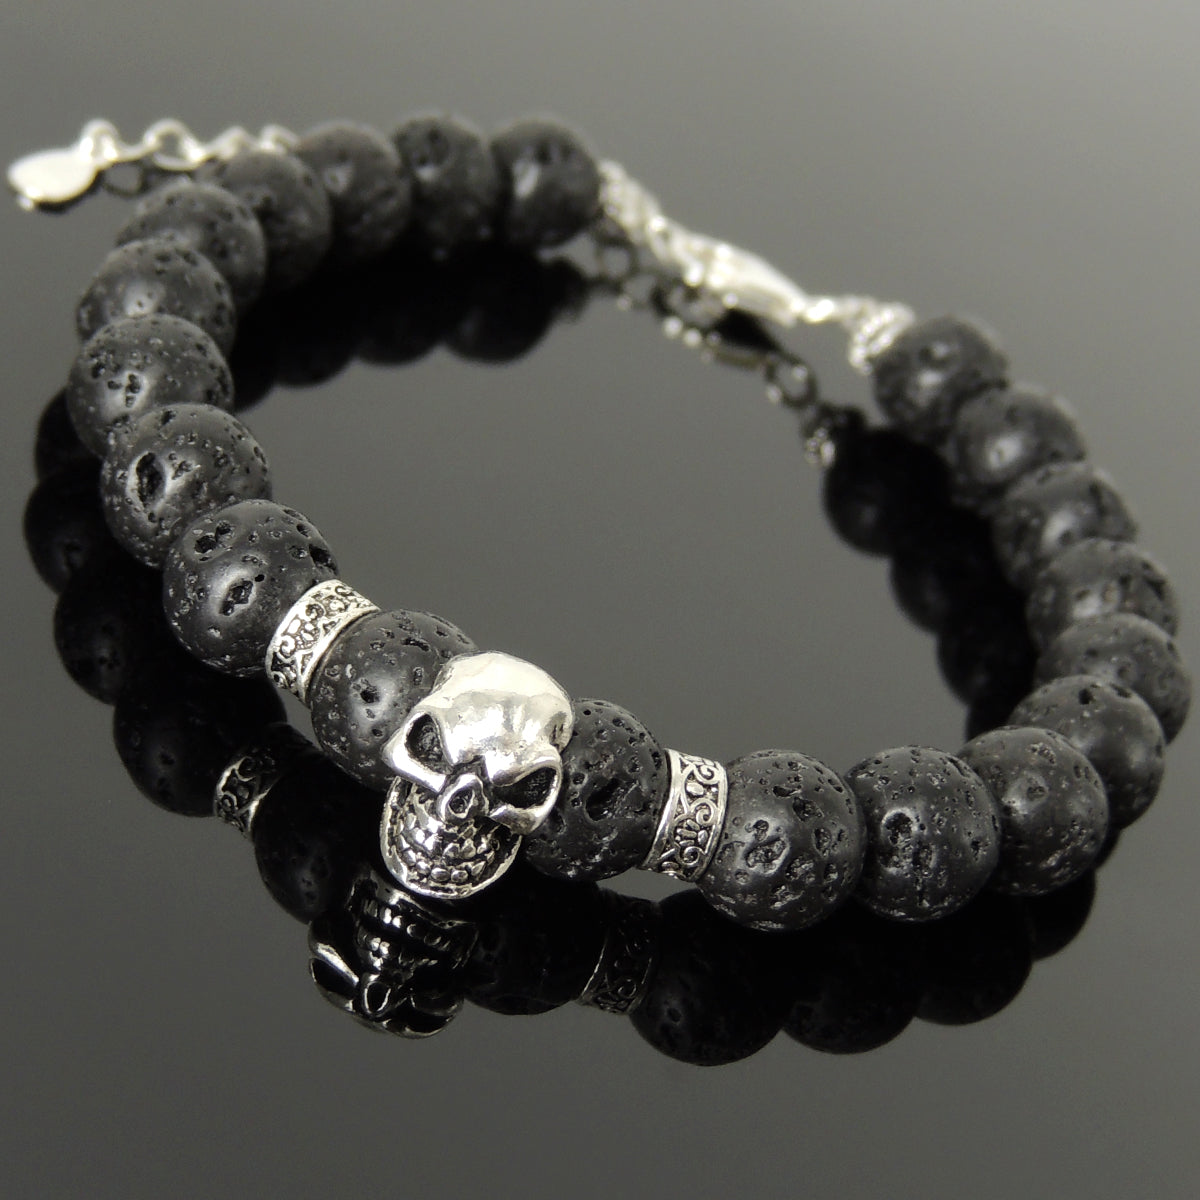 8mm Lava Rock Healing Stone Bracelet with S925 Sterling Silver Gothic Protection Skull, Chain, & Clasp - Handmade by Gem & Silver BR1387